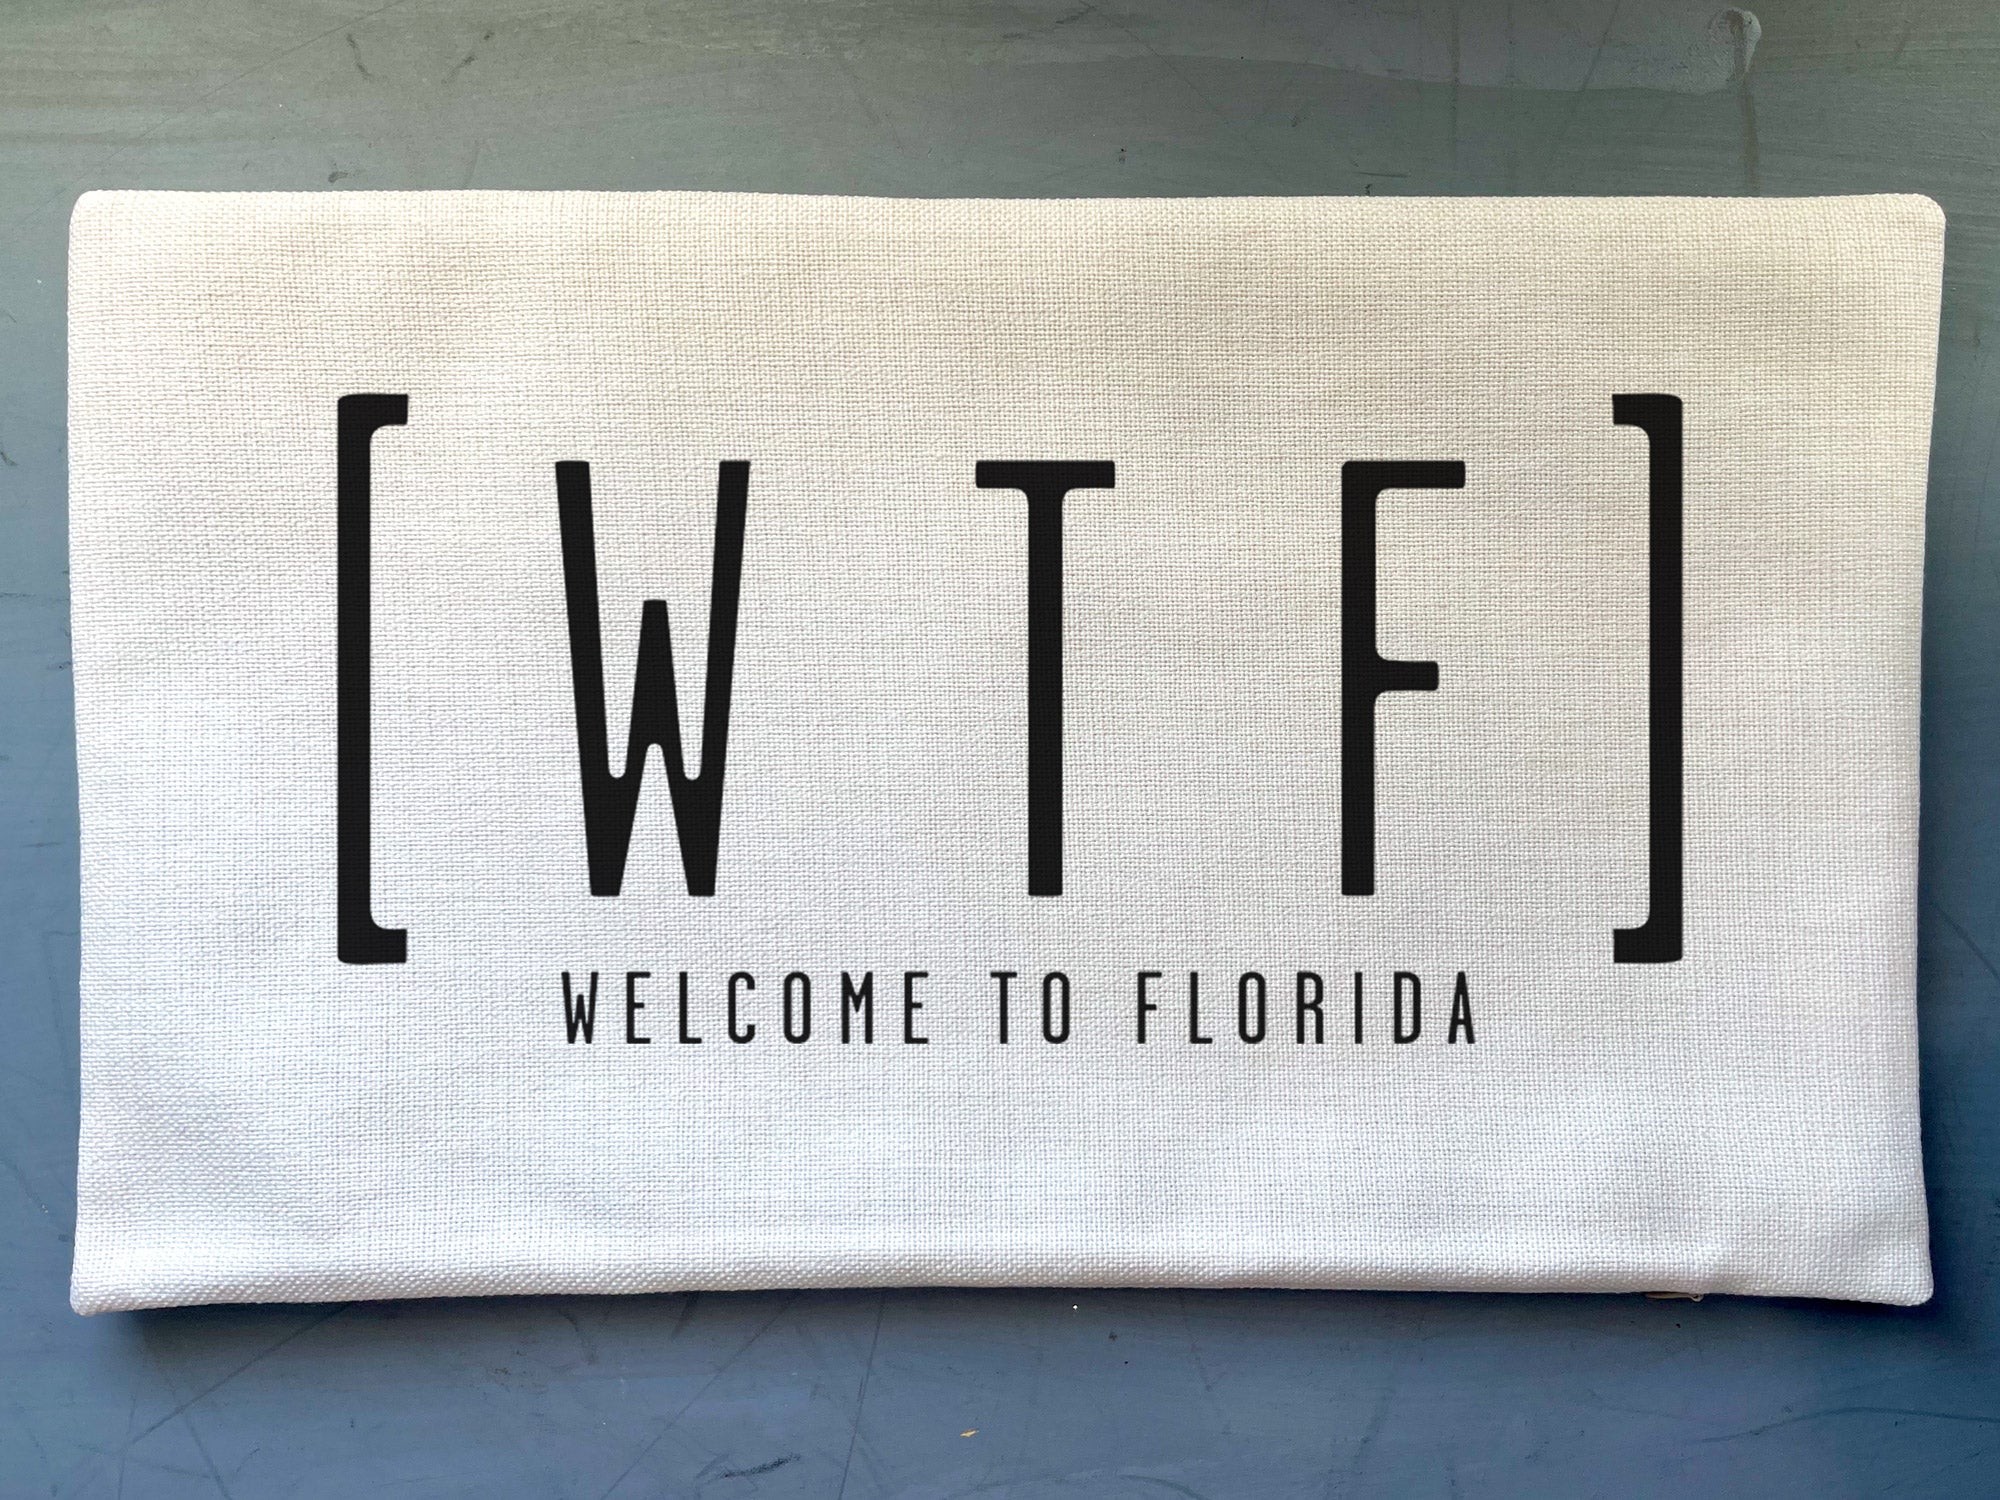 WTF Welcome To Florida Pillow | Decorative Throw Pillow Cover Cushion Sham